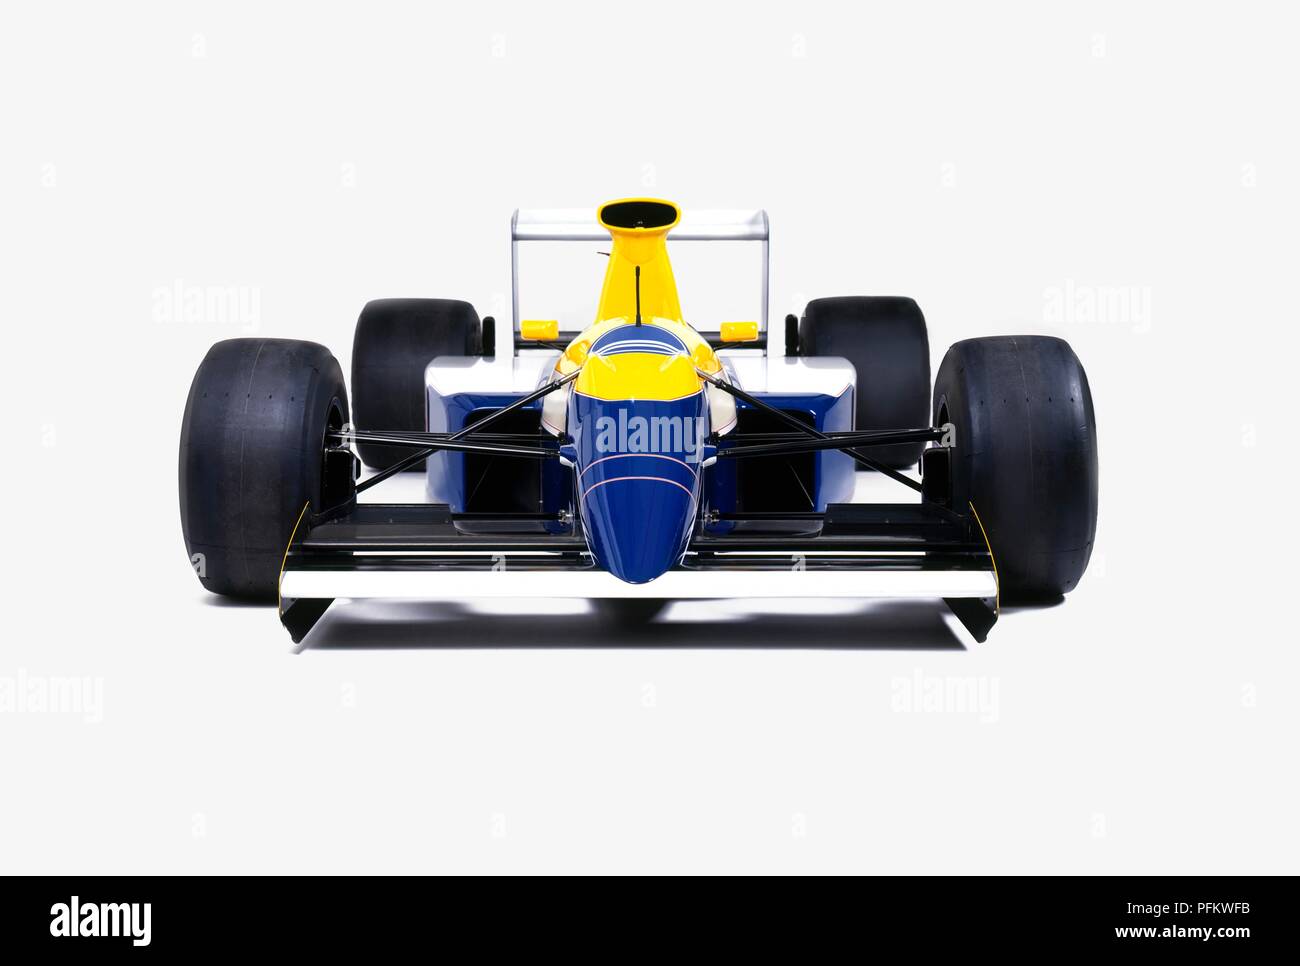 Formula One racing car, front view Stock Photo